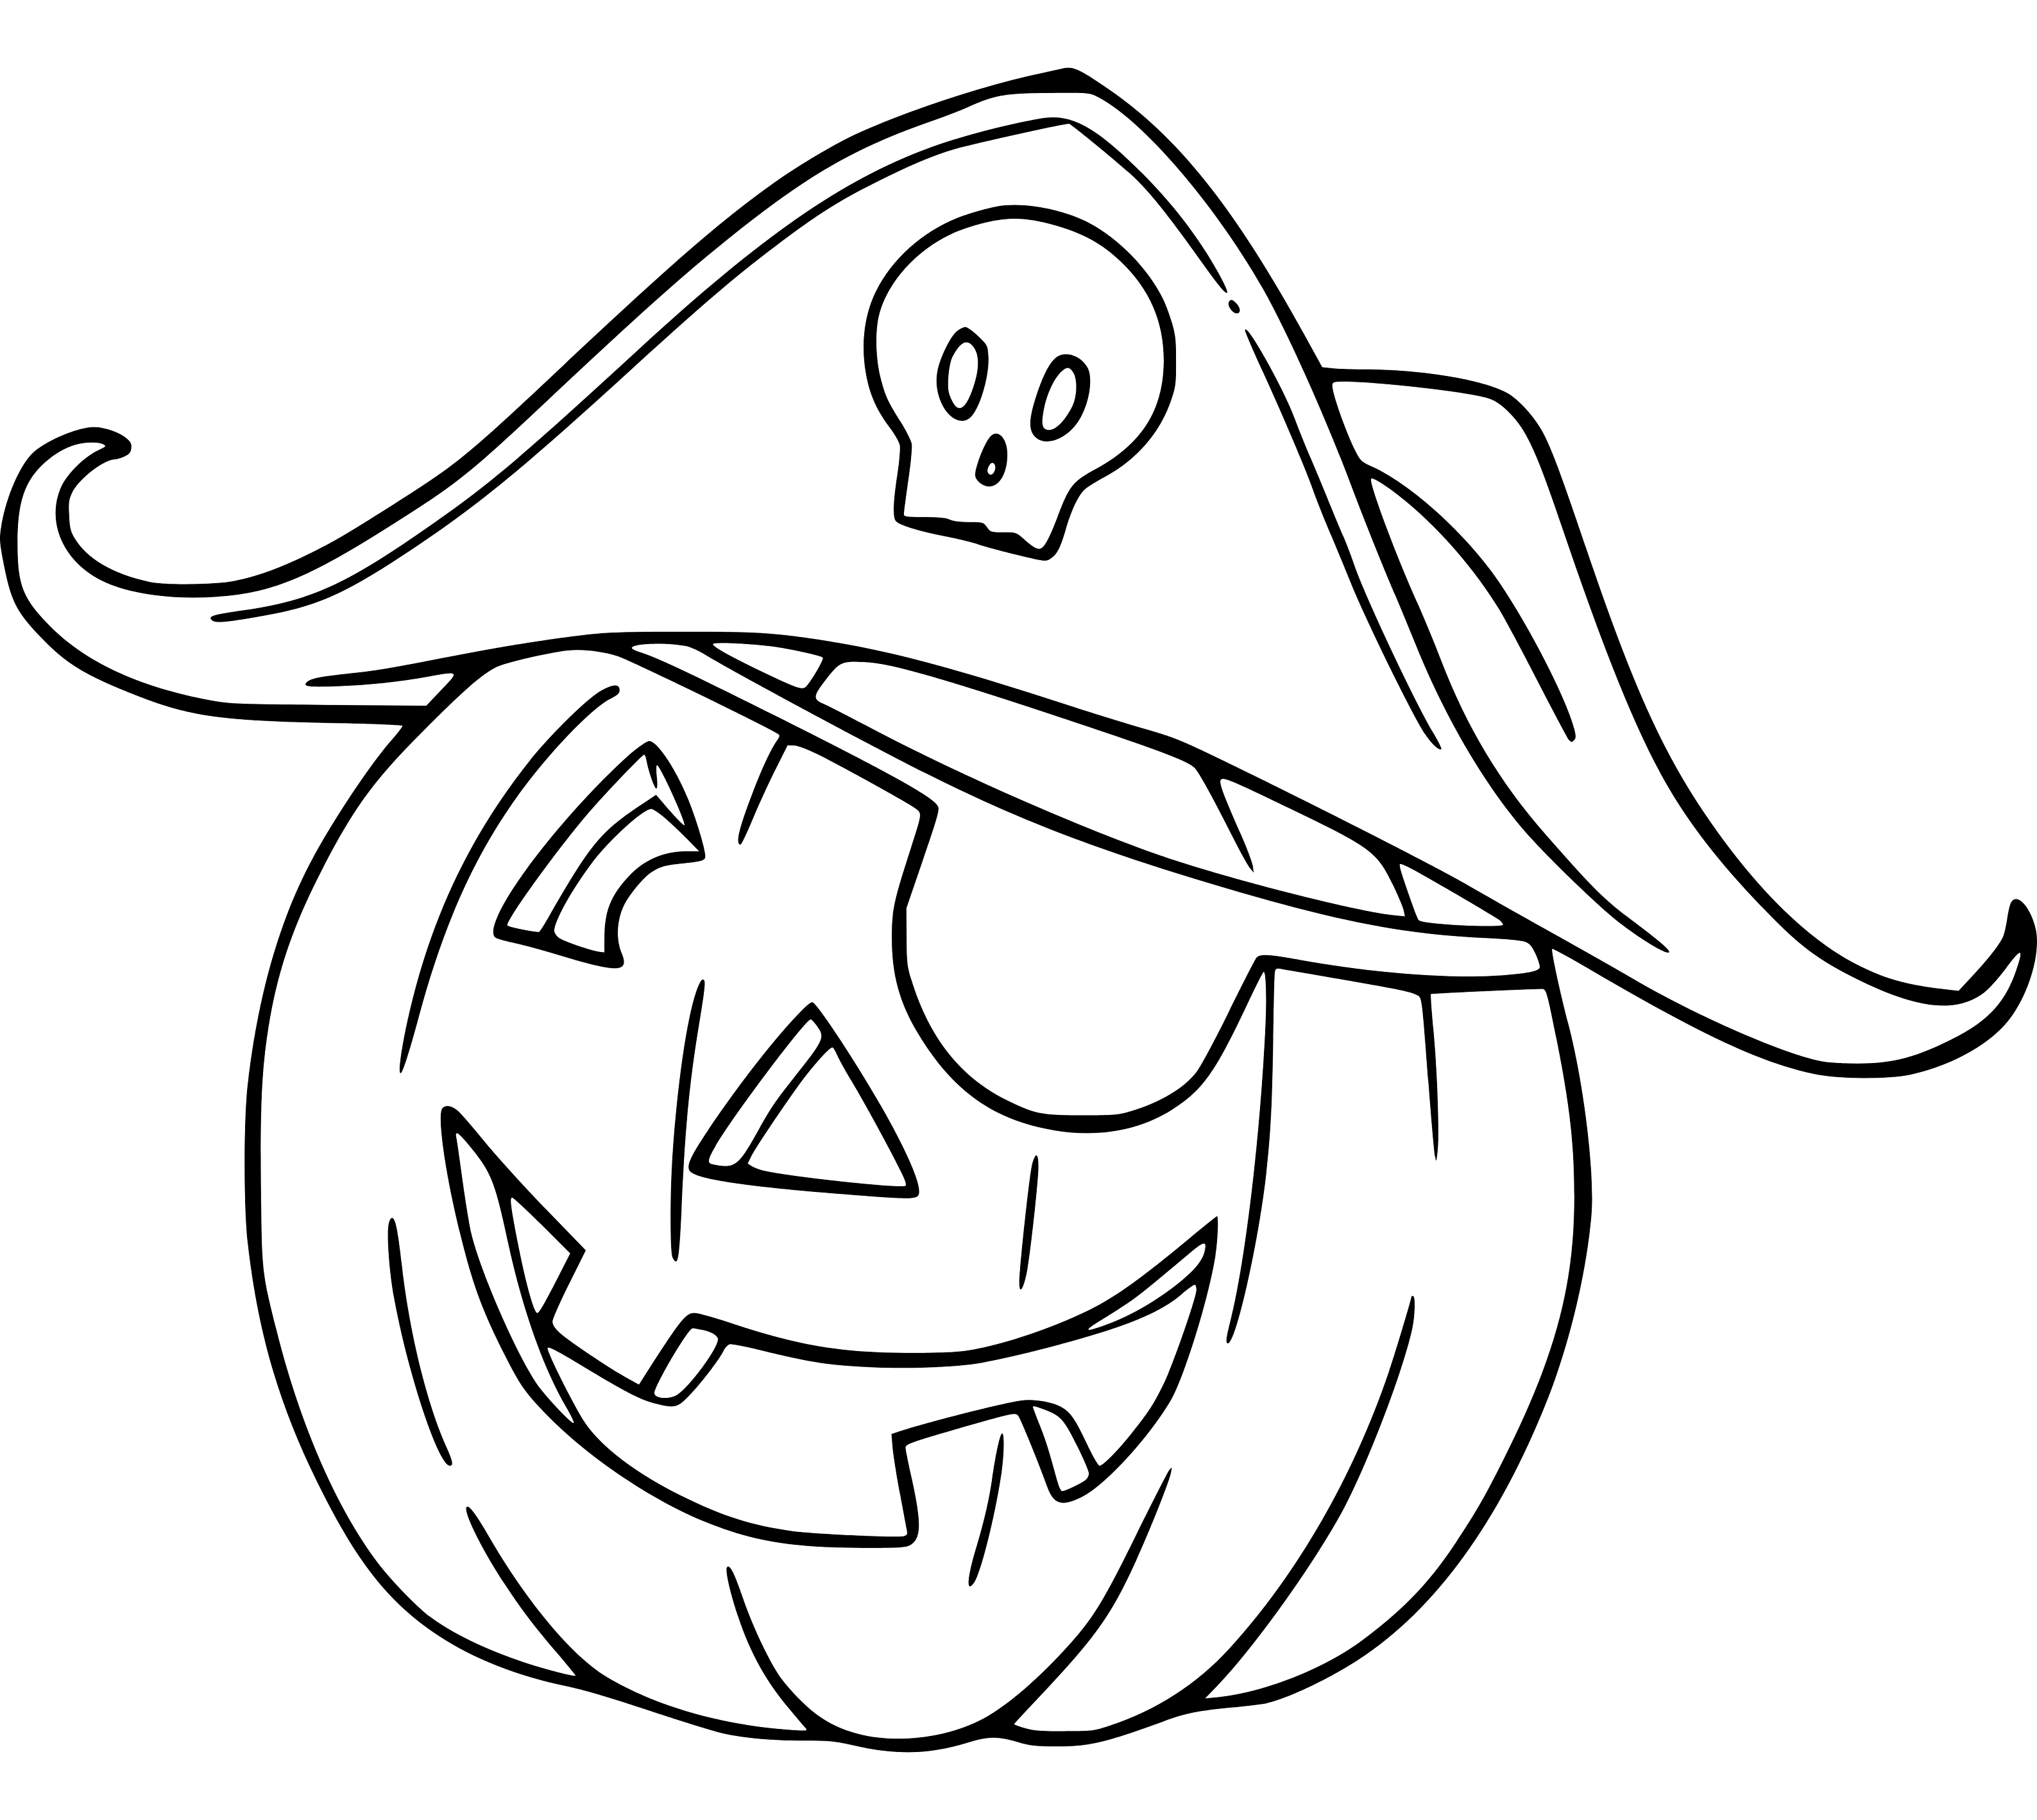 Pirate Halloween Coloring Pages for Kids Printable Free - SheetalColor.com